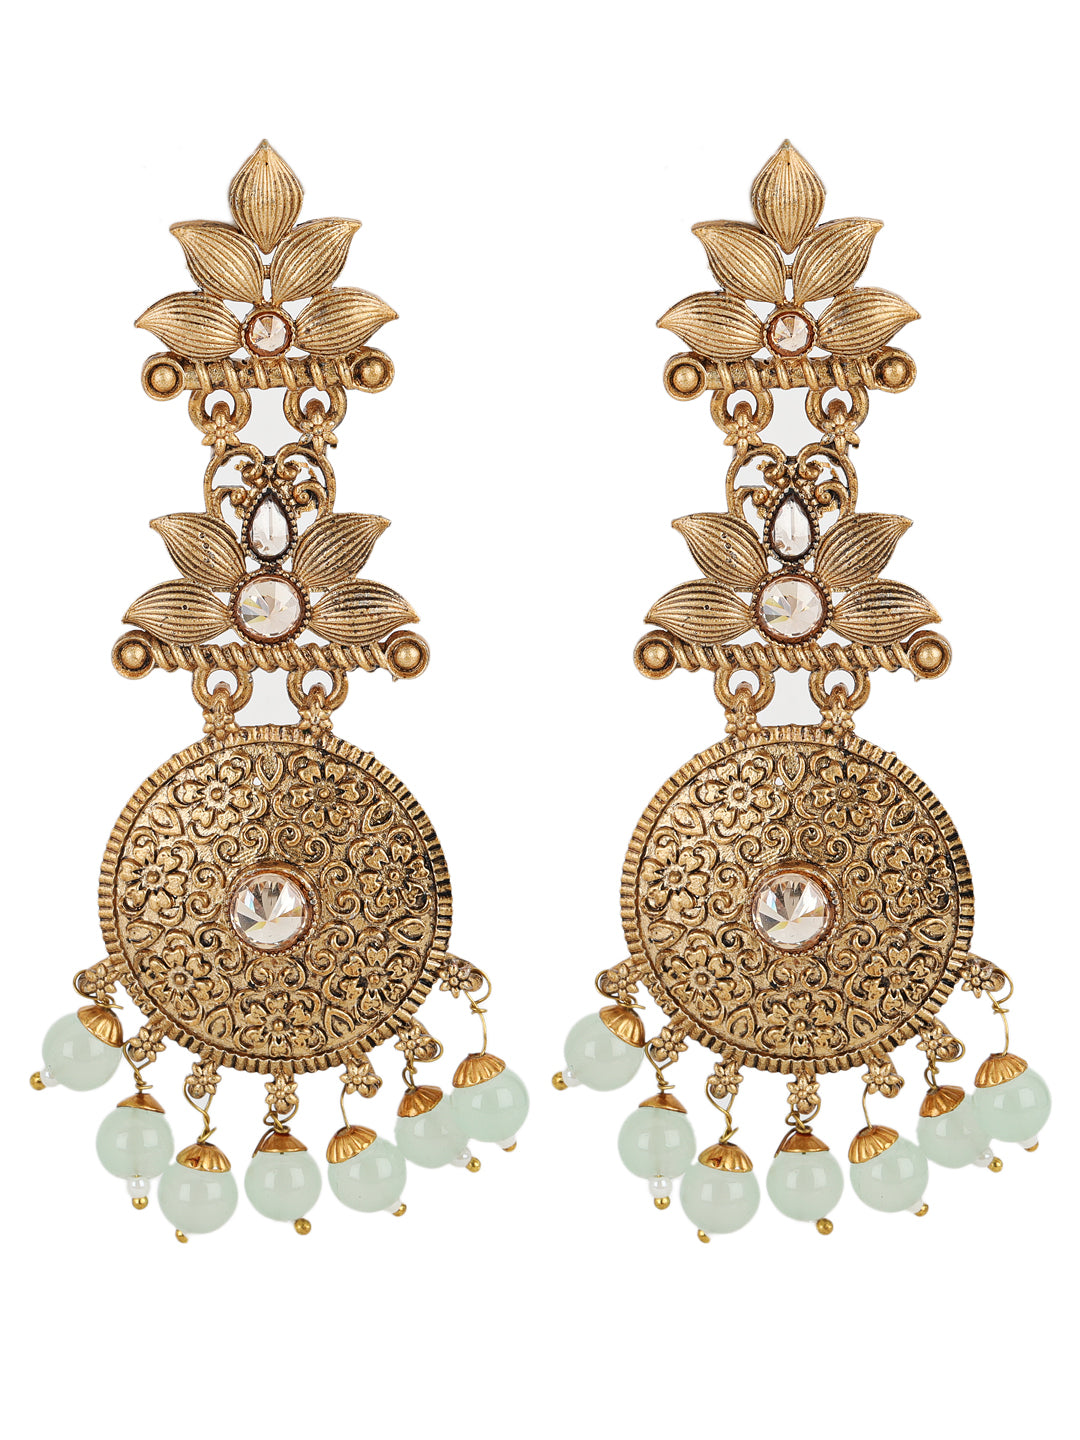 Antique Gold-Plated Textured Handcrafted Floral pattern Classic Drop Earrings - Jazzandsizzle